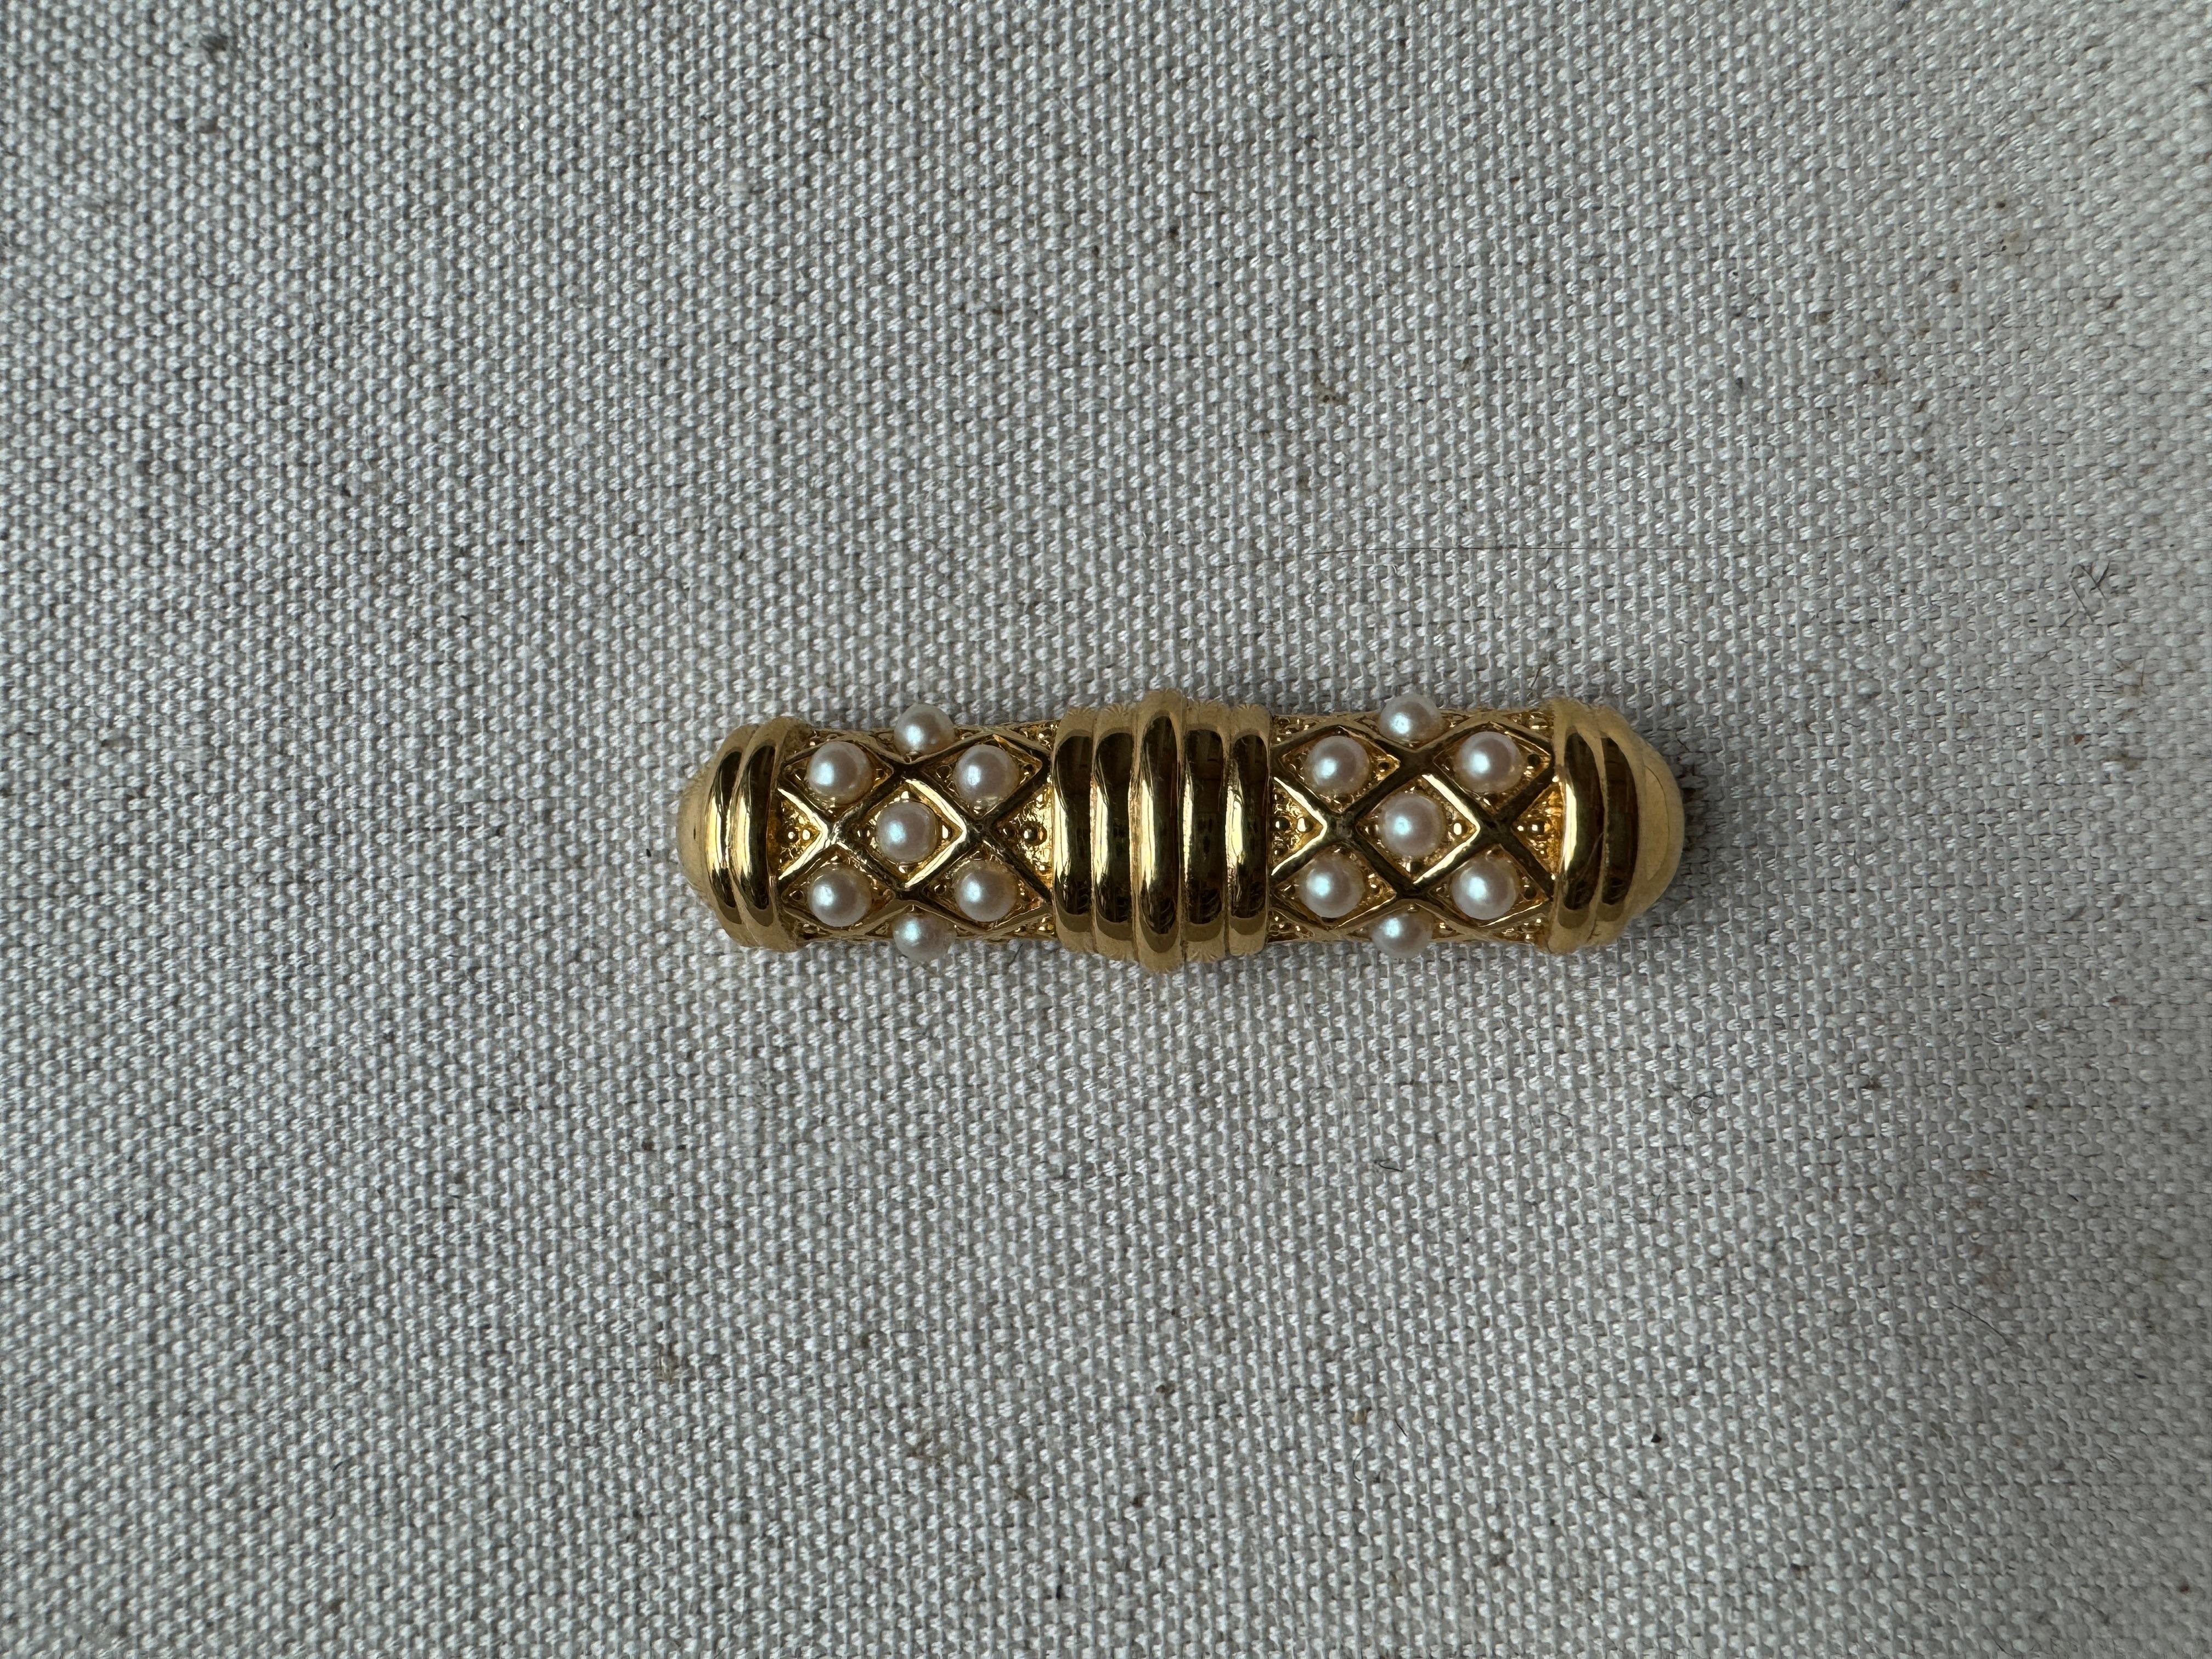 Vintage Deco Richelieu Gold Tone Brooch with Pearl Accents  In Excellent Condition For Sale In Amagansett, NY